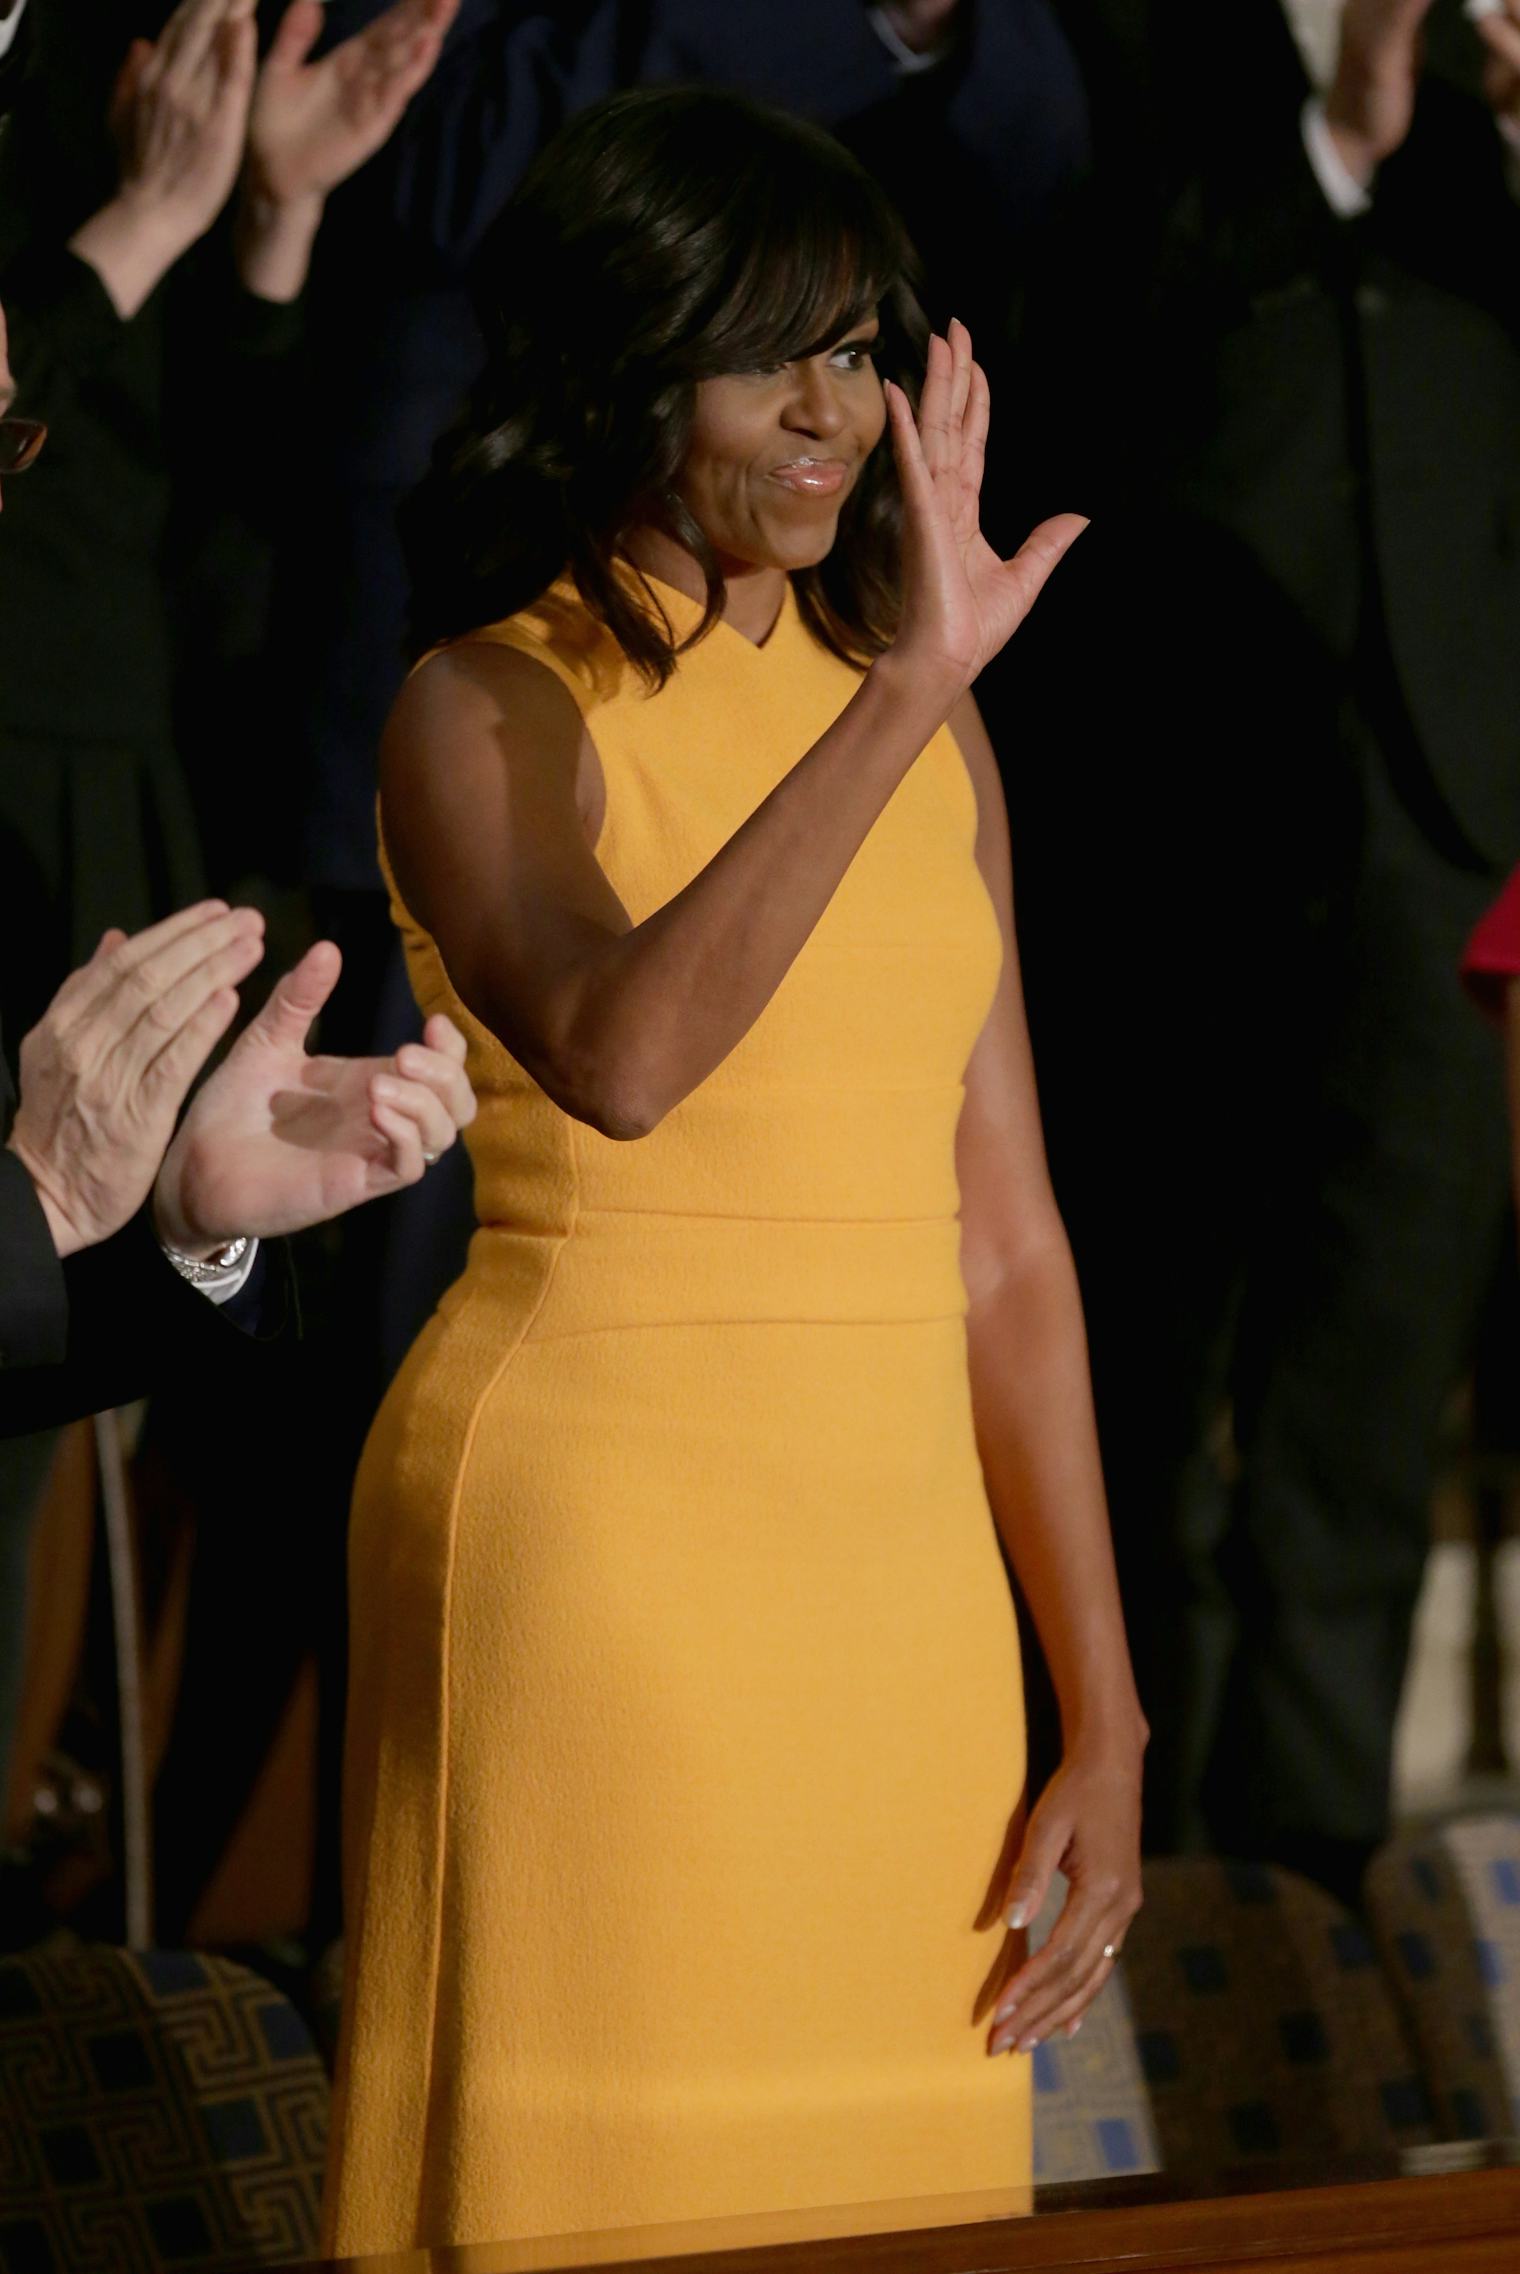 Michelle Obama's Yellow Dress At State Of The Union Address Is A Bright